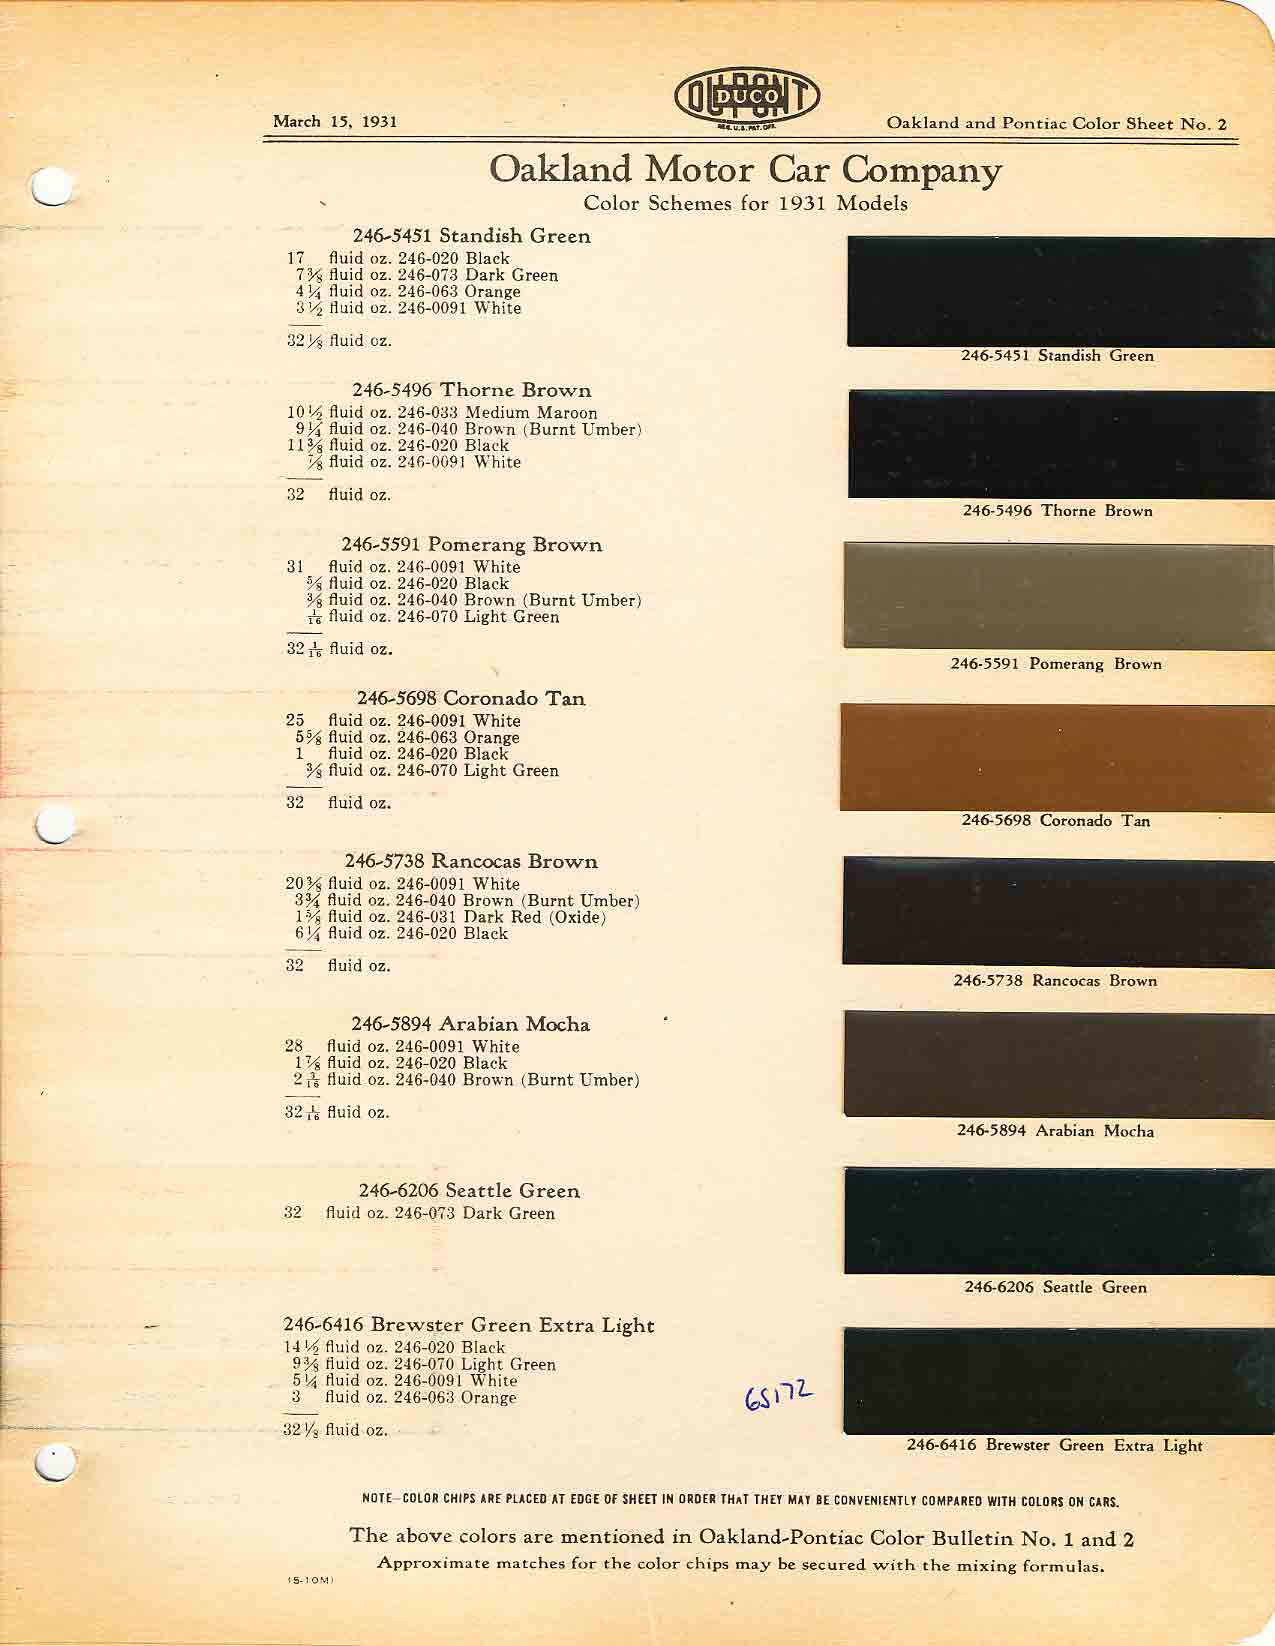 Colors and codes used on Oakland Vehicles in 1931